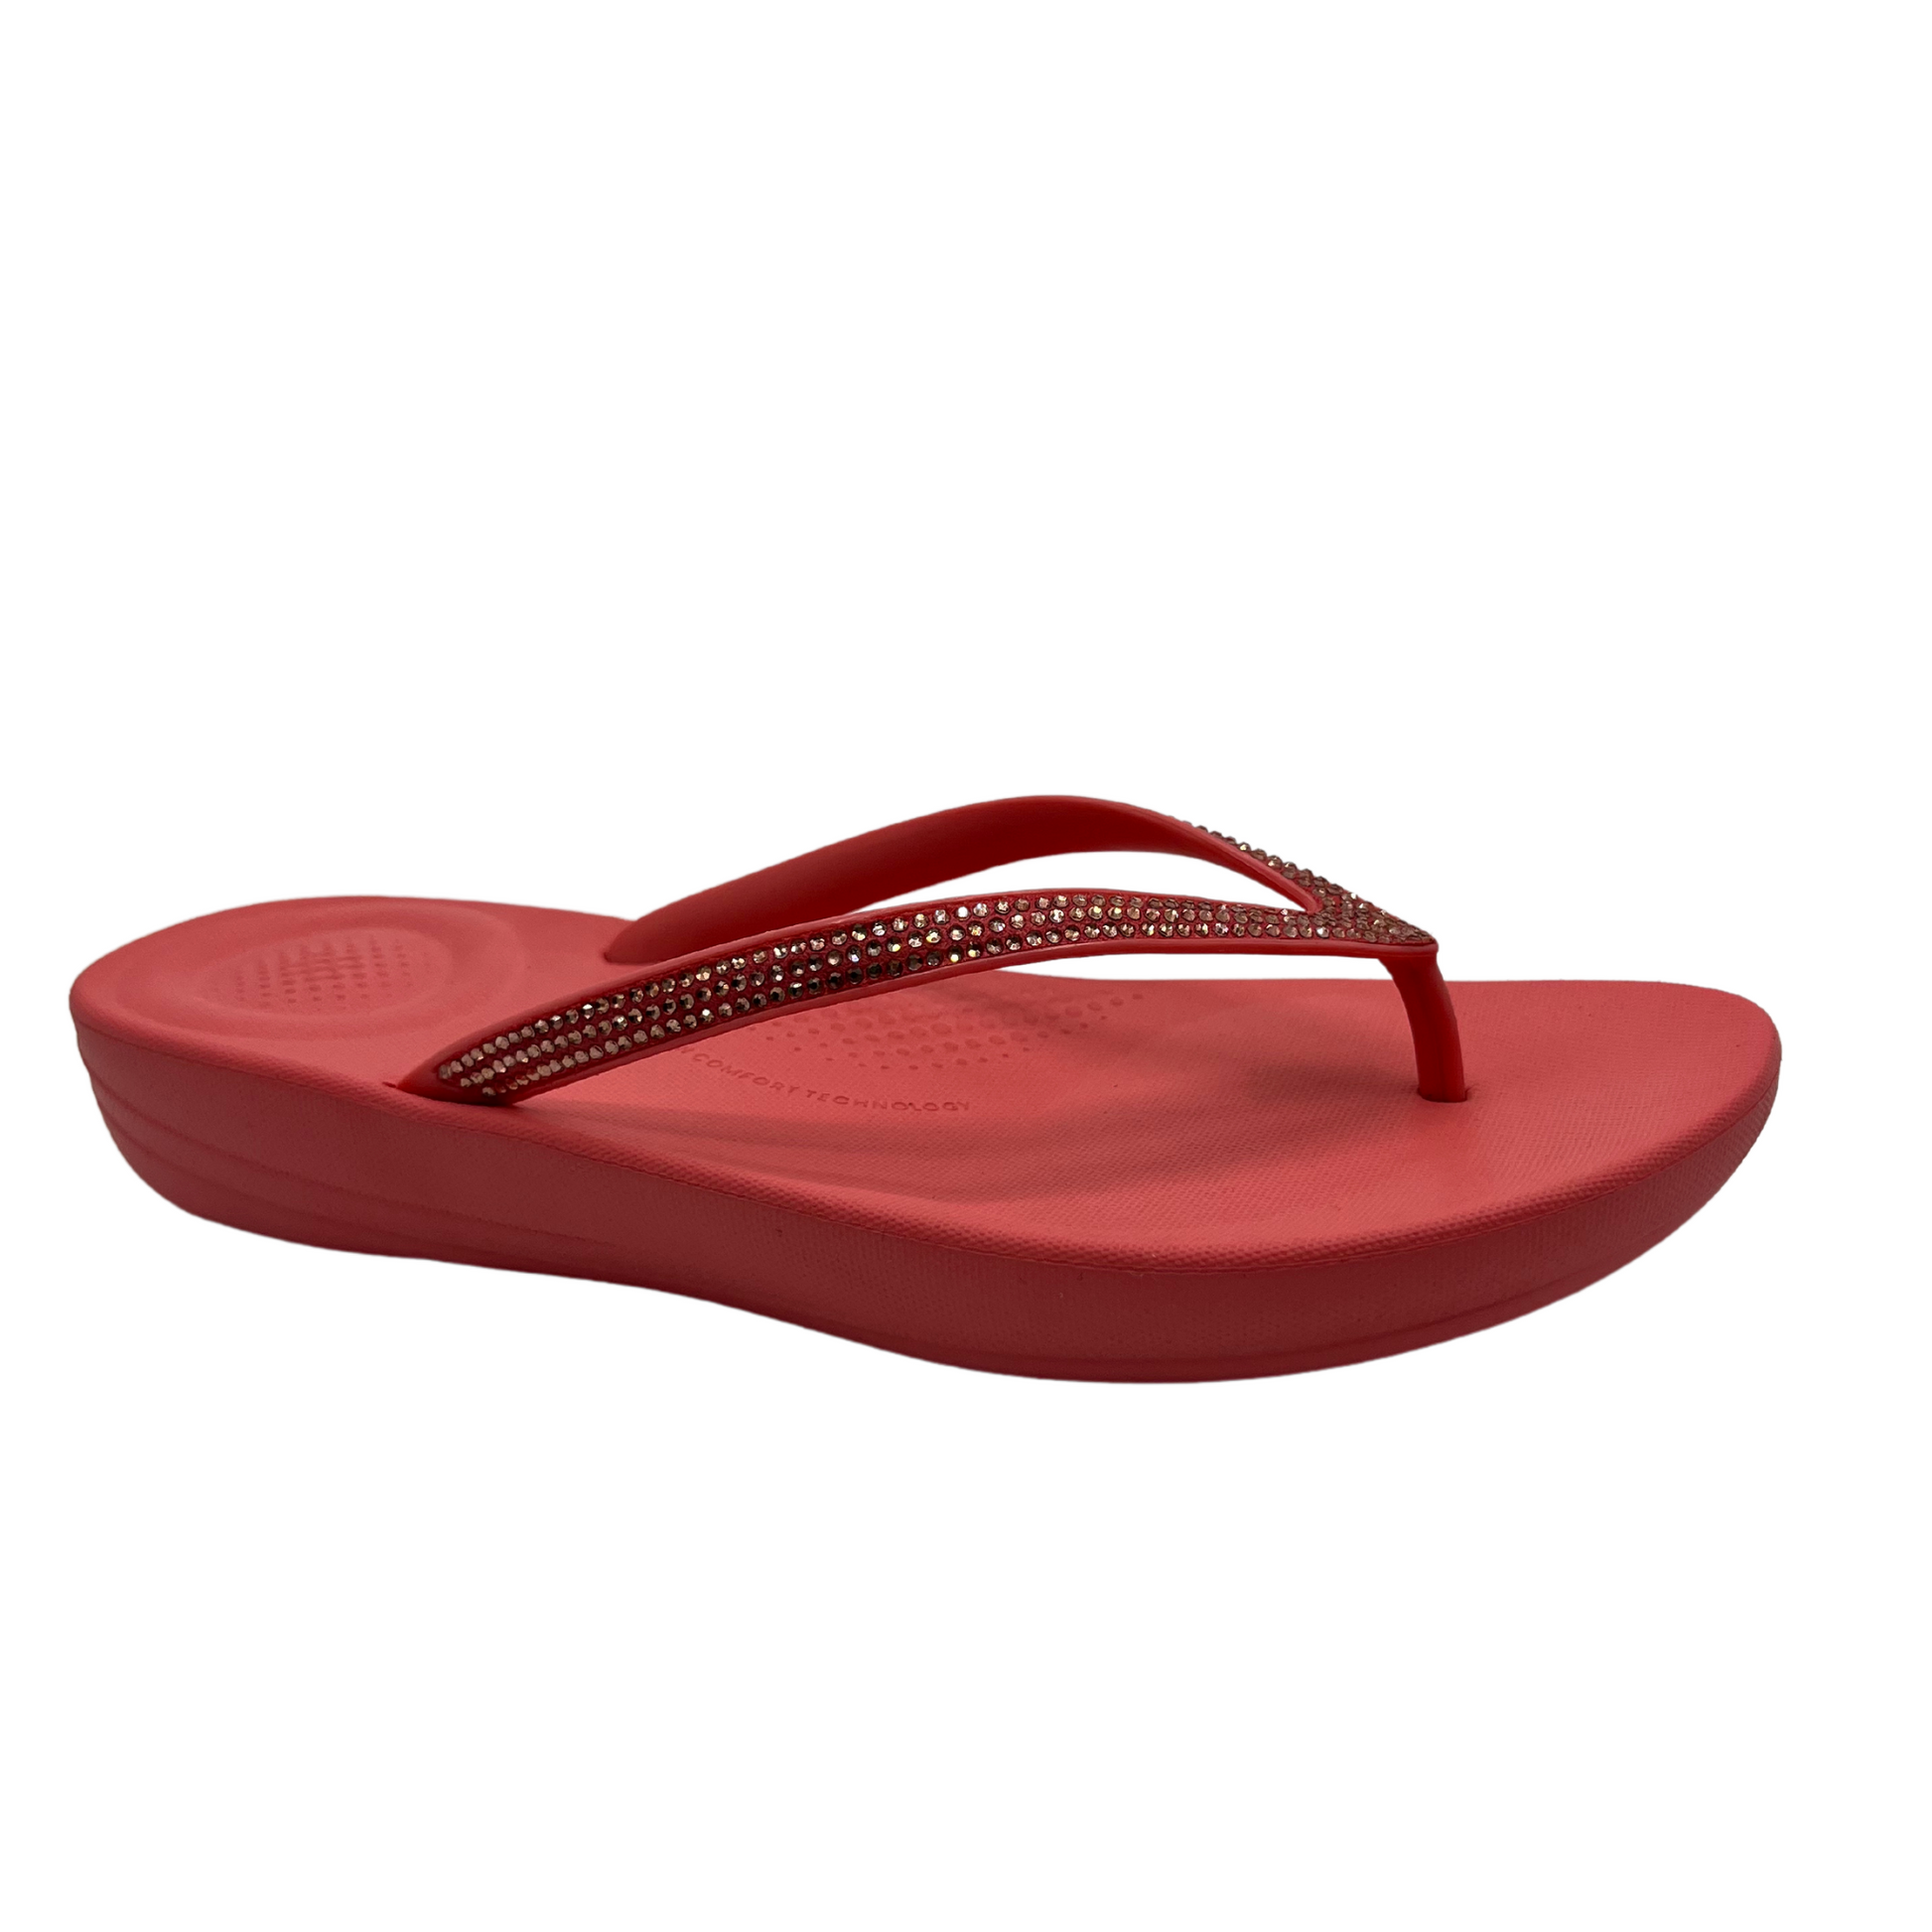 45 degree angled view of rosy coral flip flop with bejewelled thong strap